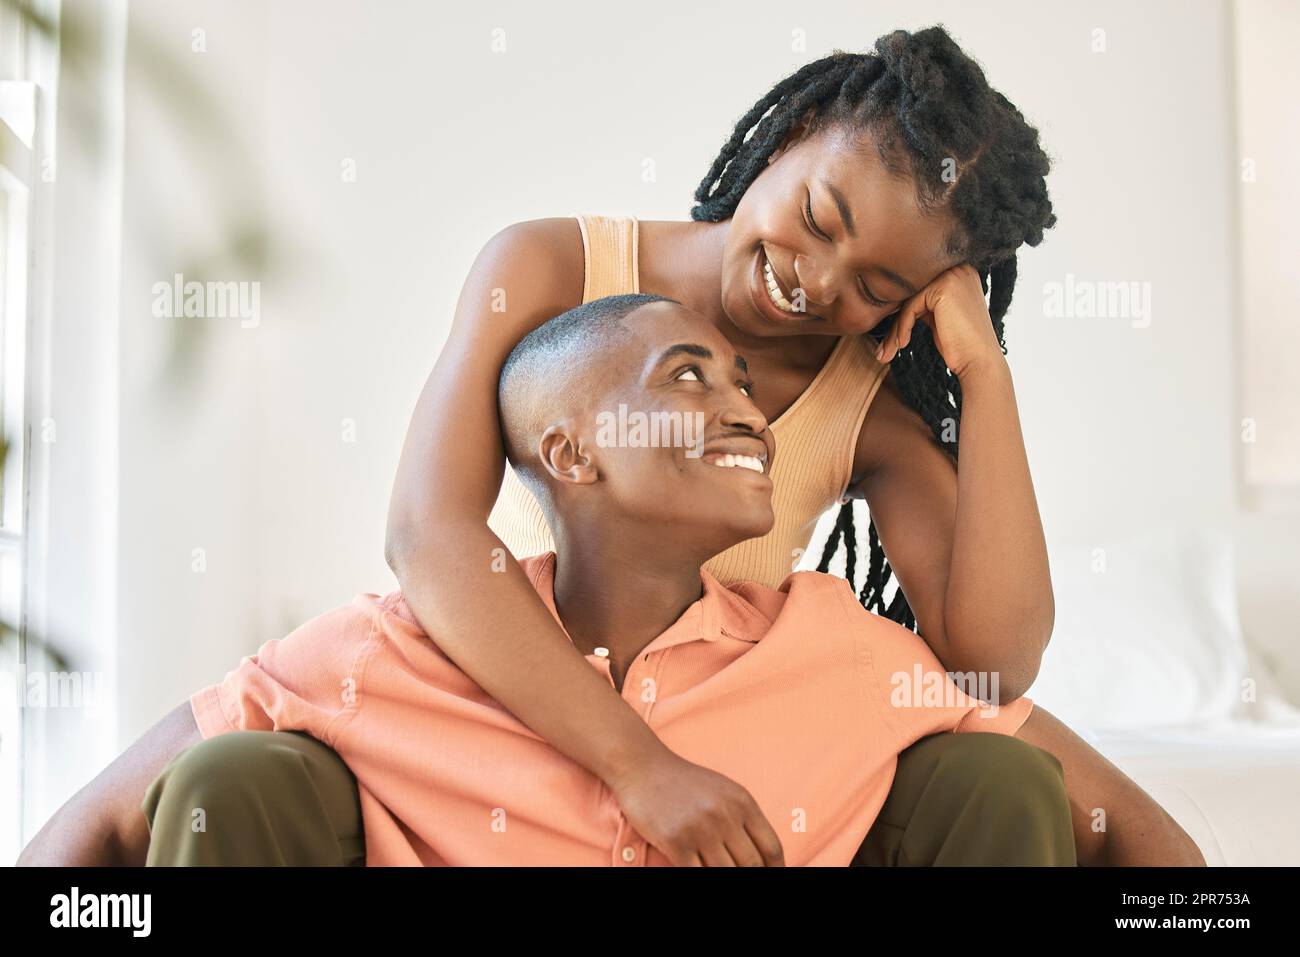 Young happy carefree and cheerful african american couple bonding and enjoying relaxing time together at home. Loving black female smiling while hugging and looking at her boyfriend sitting together Stock Photo